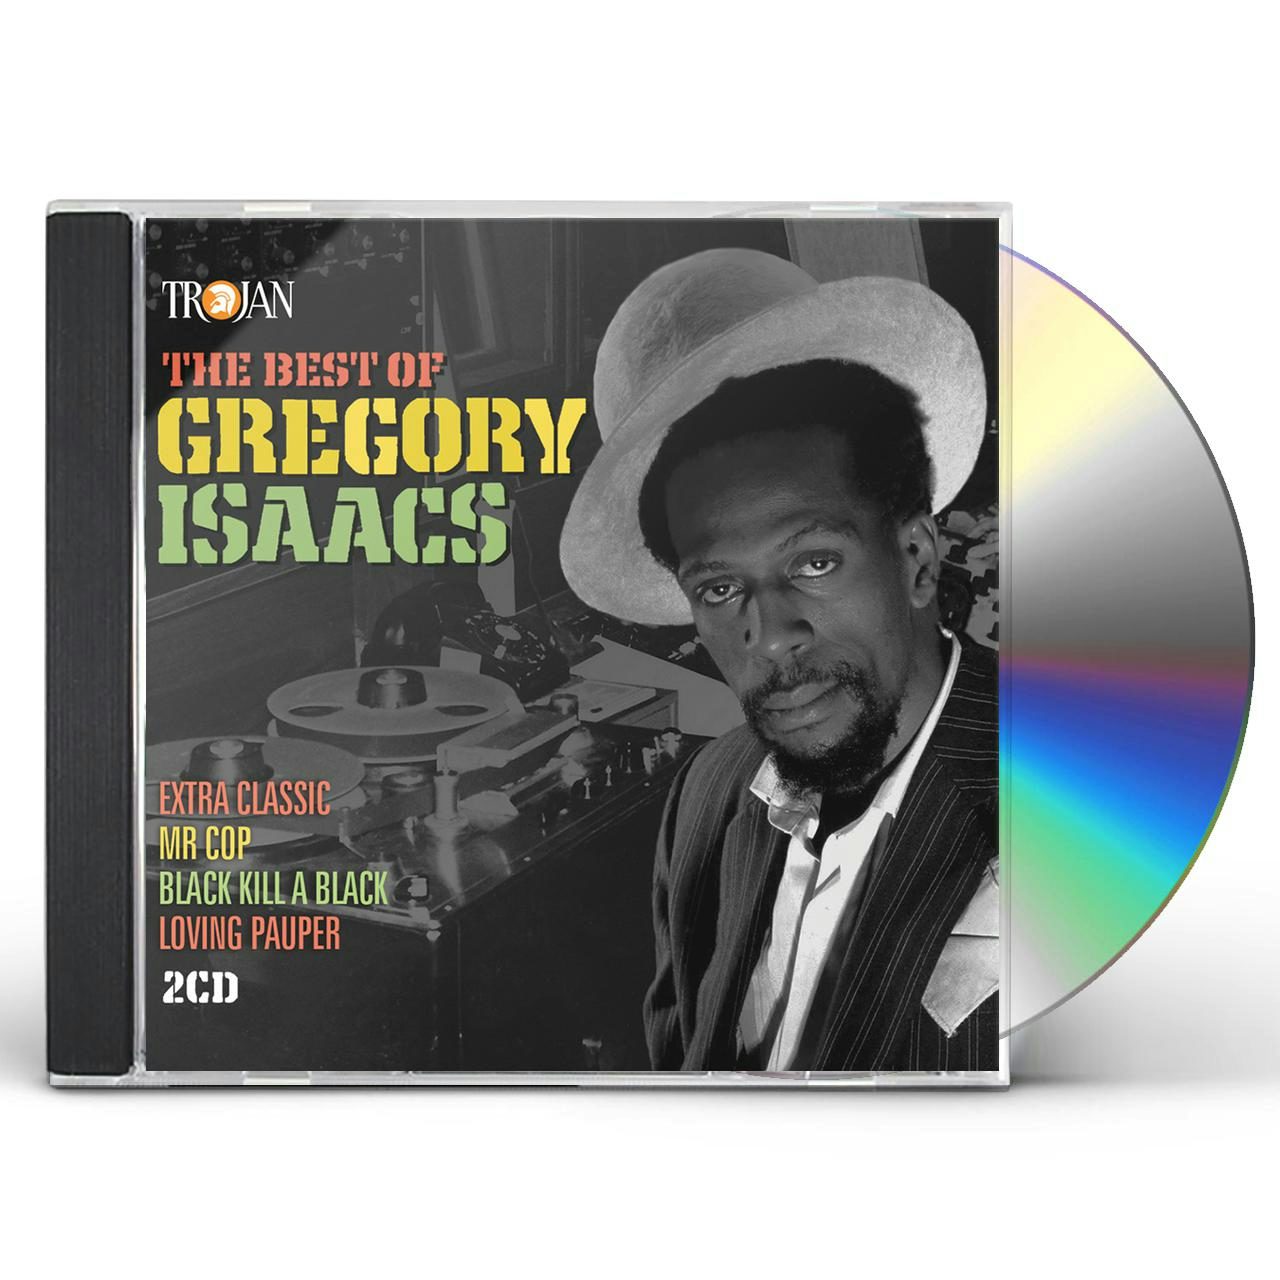 BEST OF GREGORY ISAACS CD